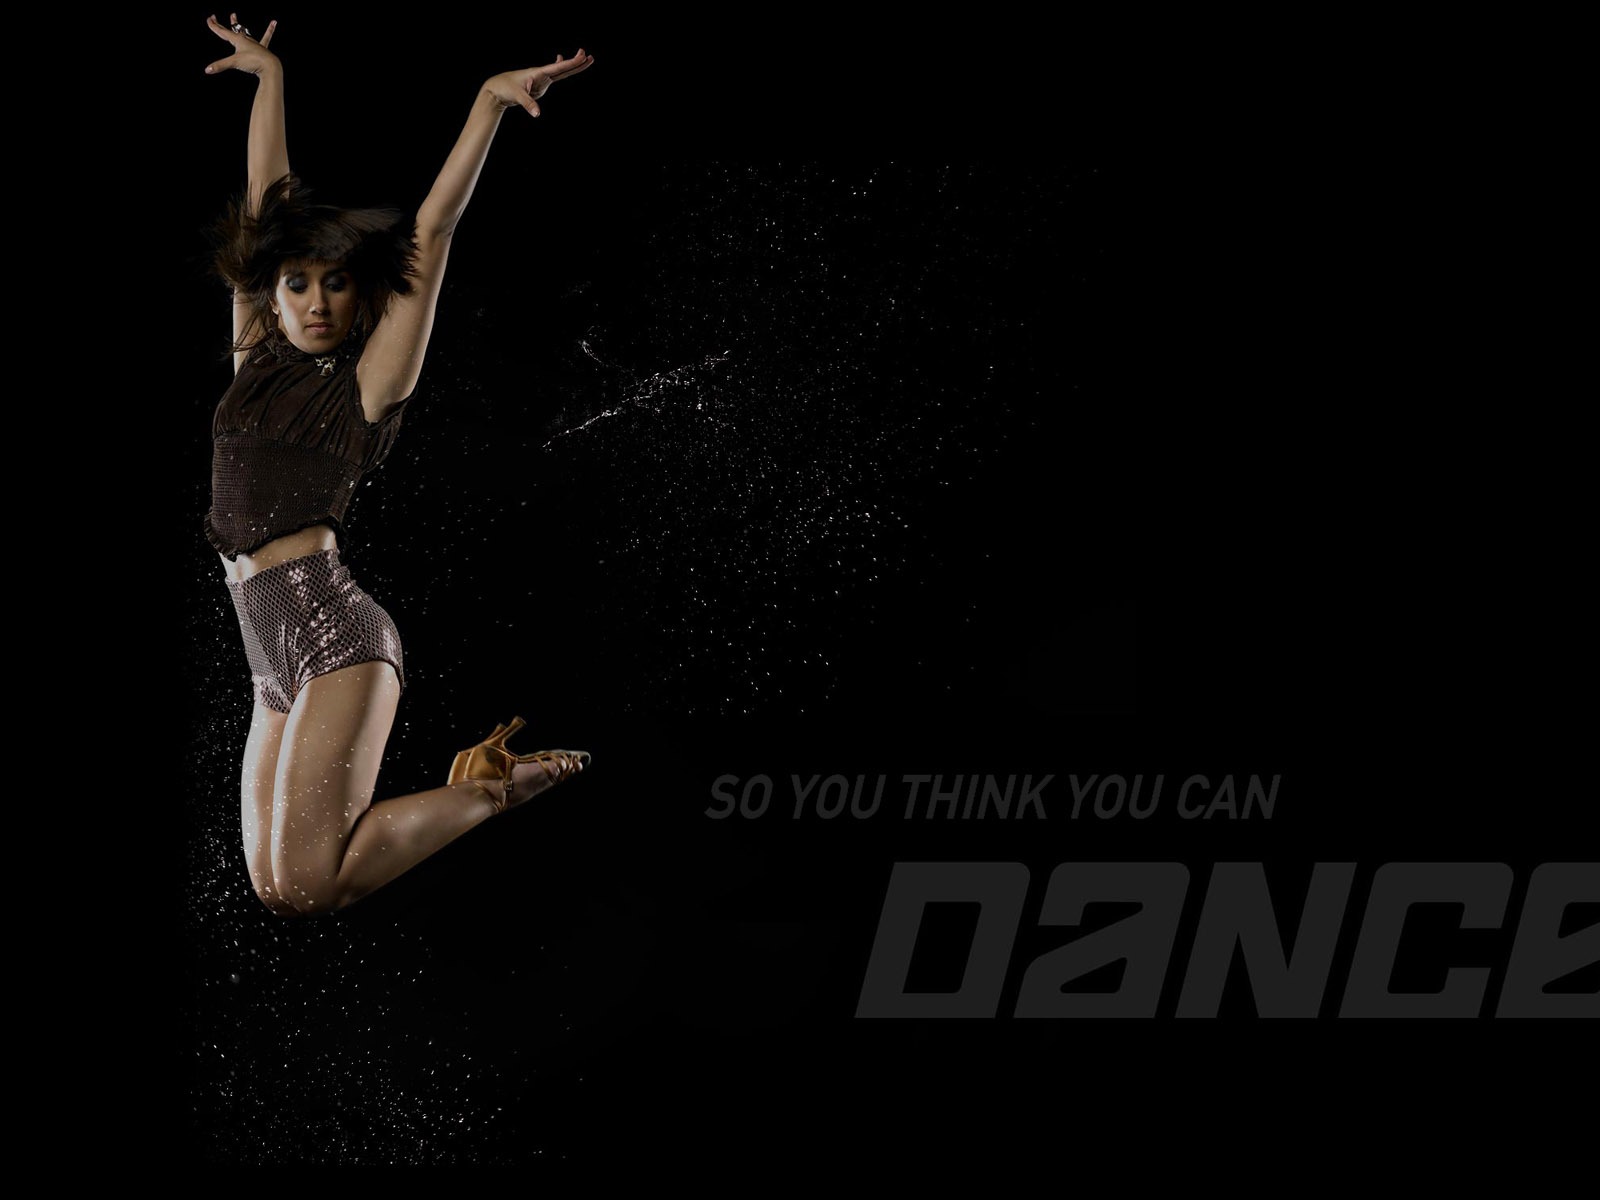 So You Think You Can Dance Wallpaper (1) #11 - 1600x1200